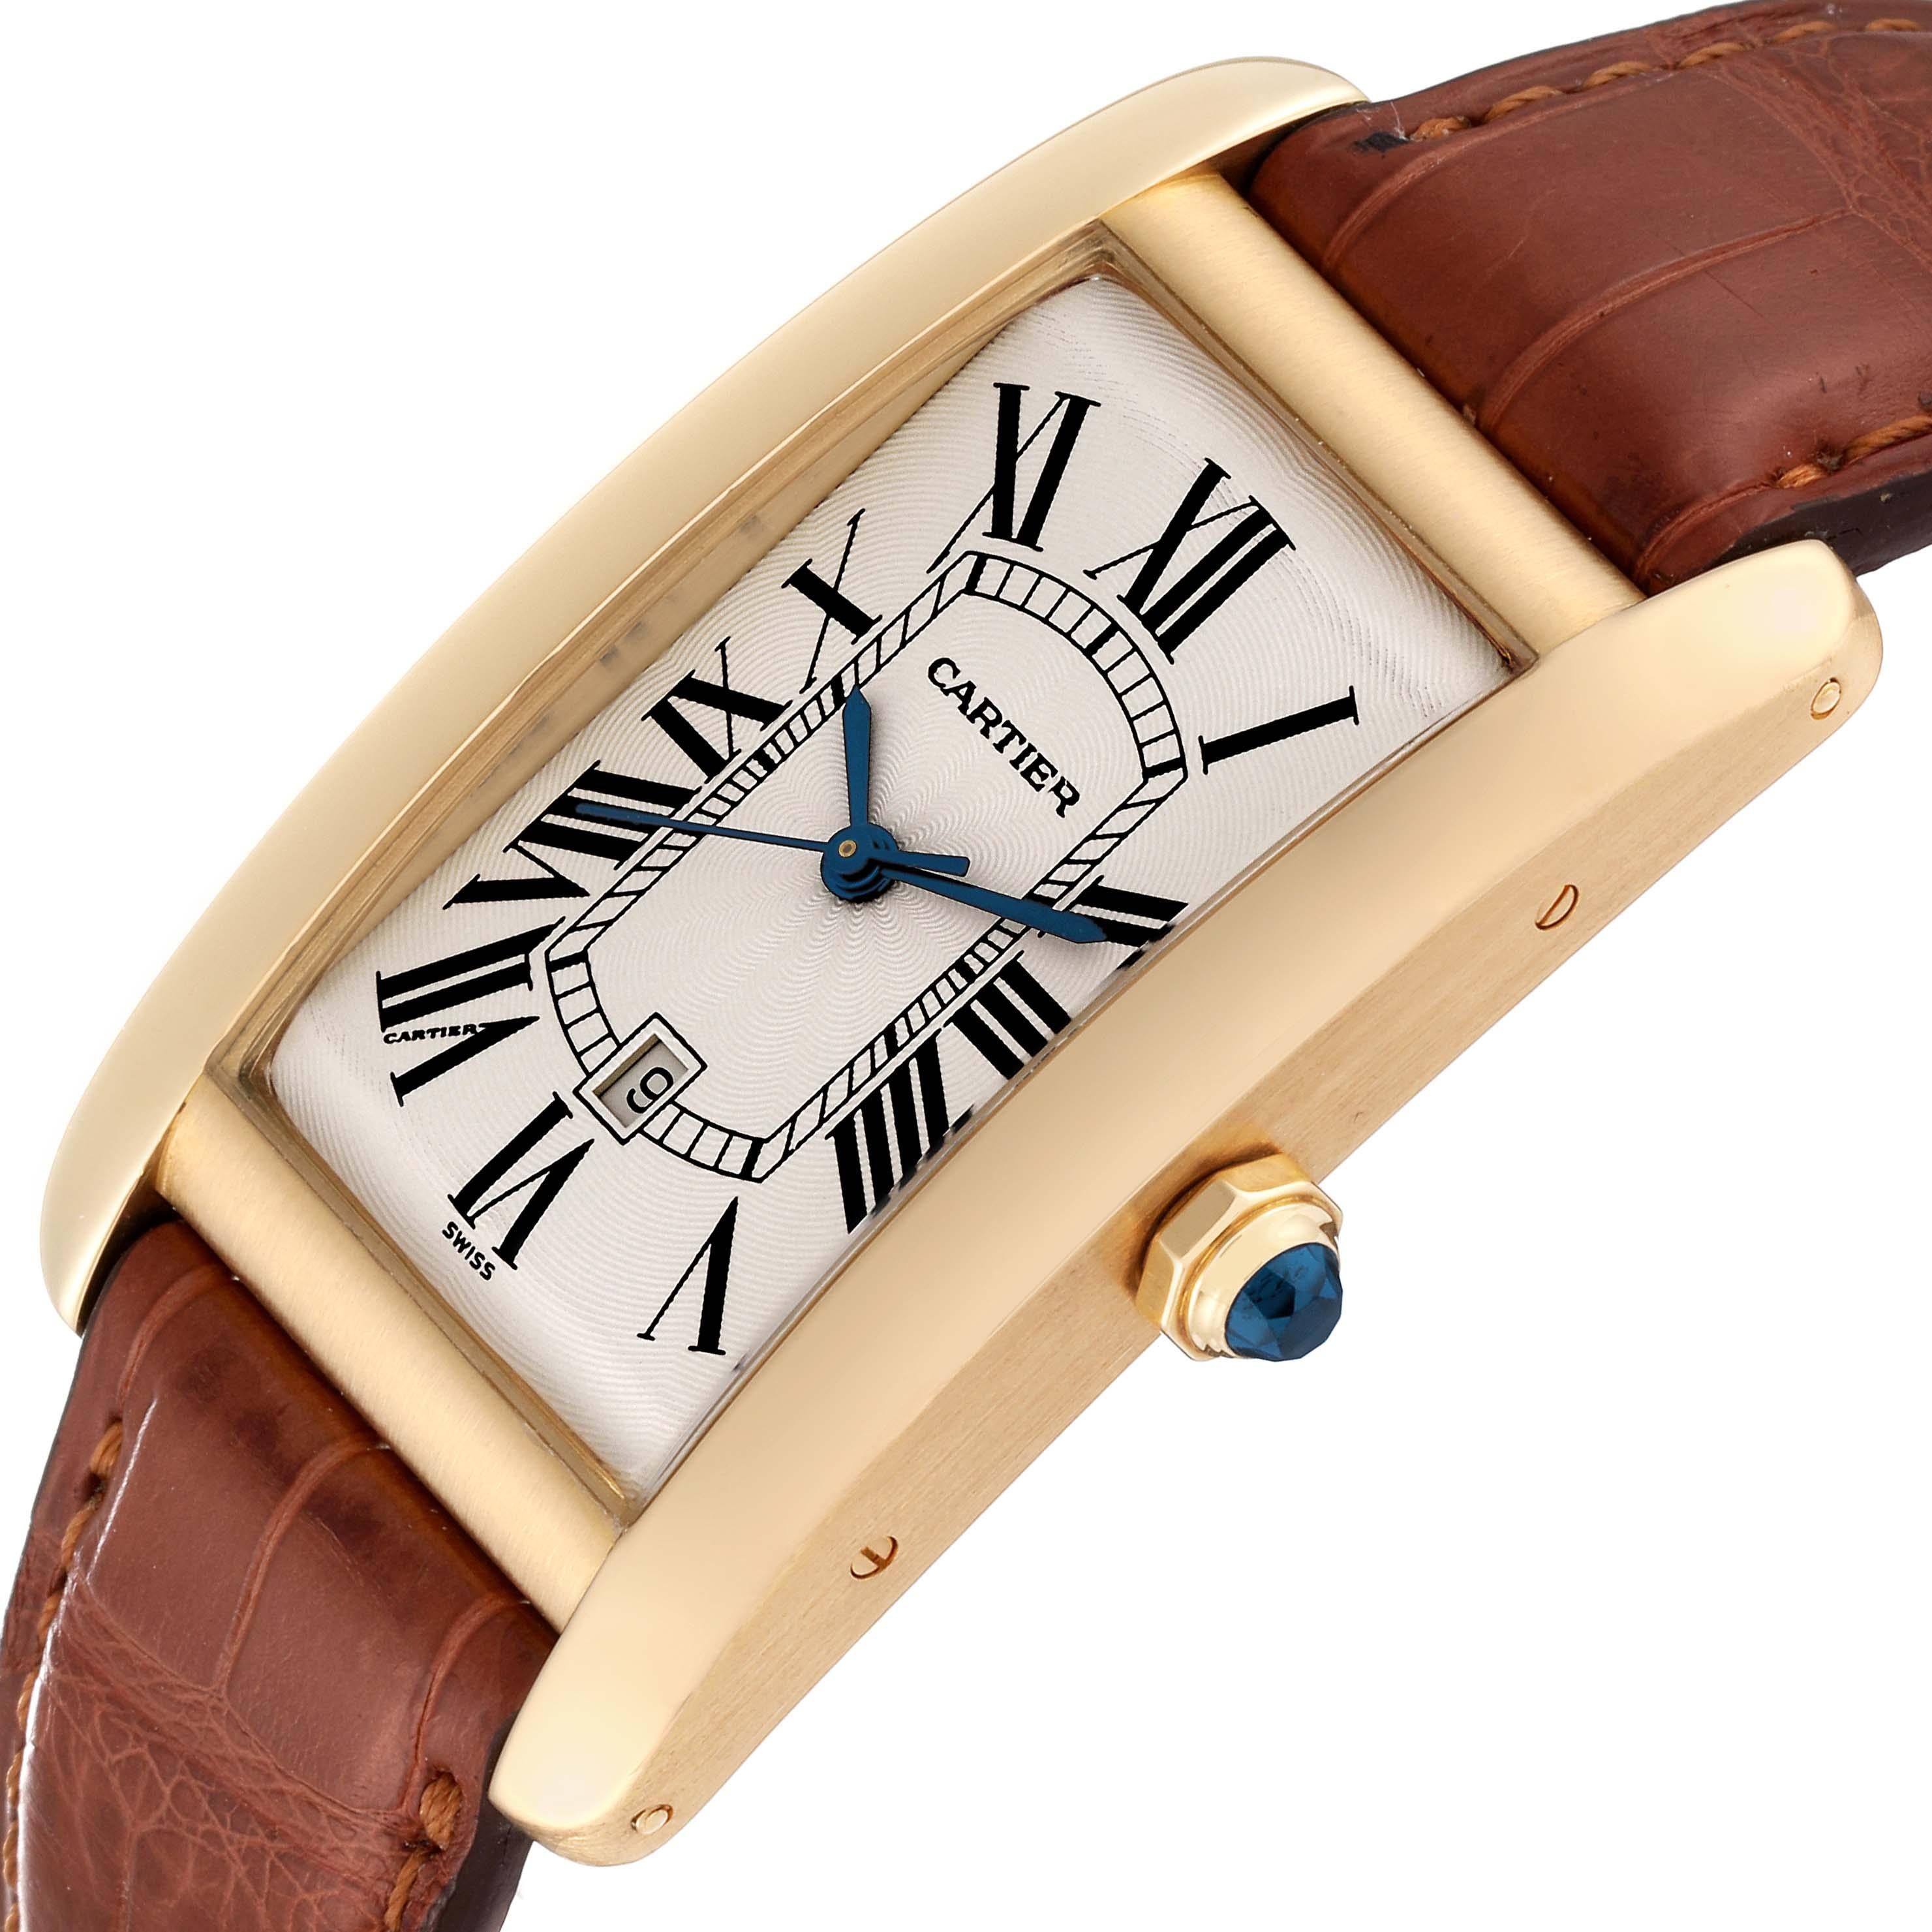 Cartier Tank Americaine Yellow Gold Automatic Mens Watch W2603156 1